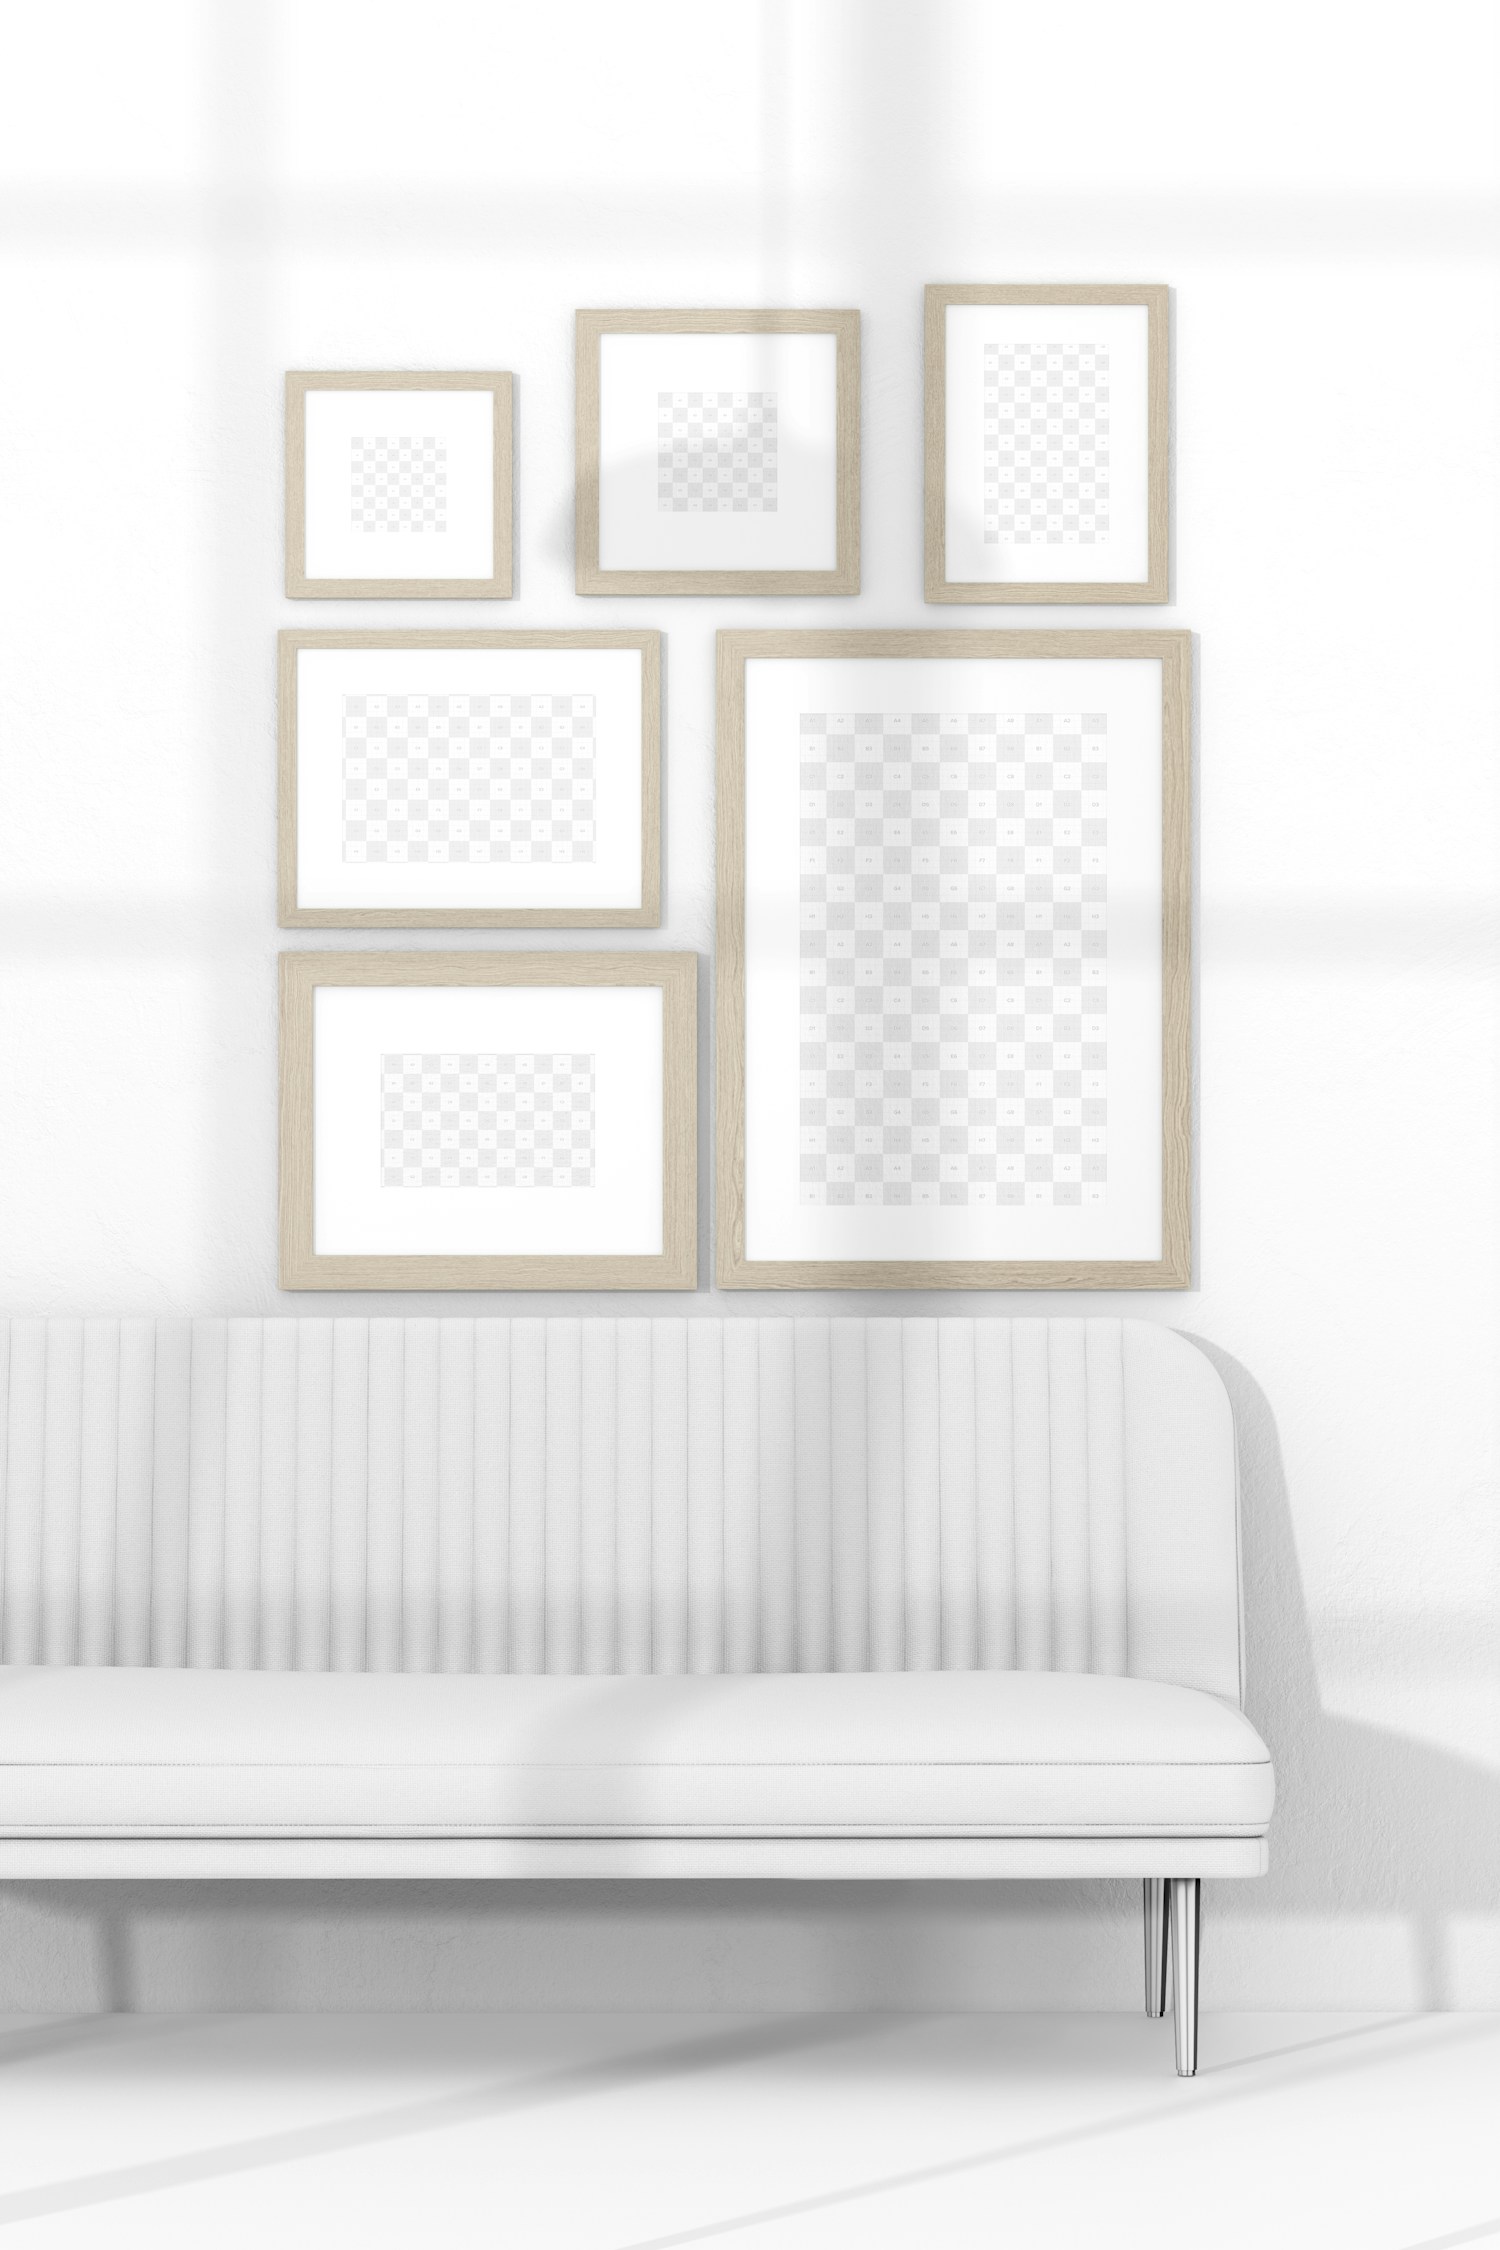 Gallery Frames with Sofa Bed Mockup